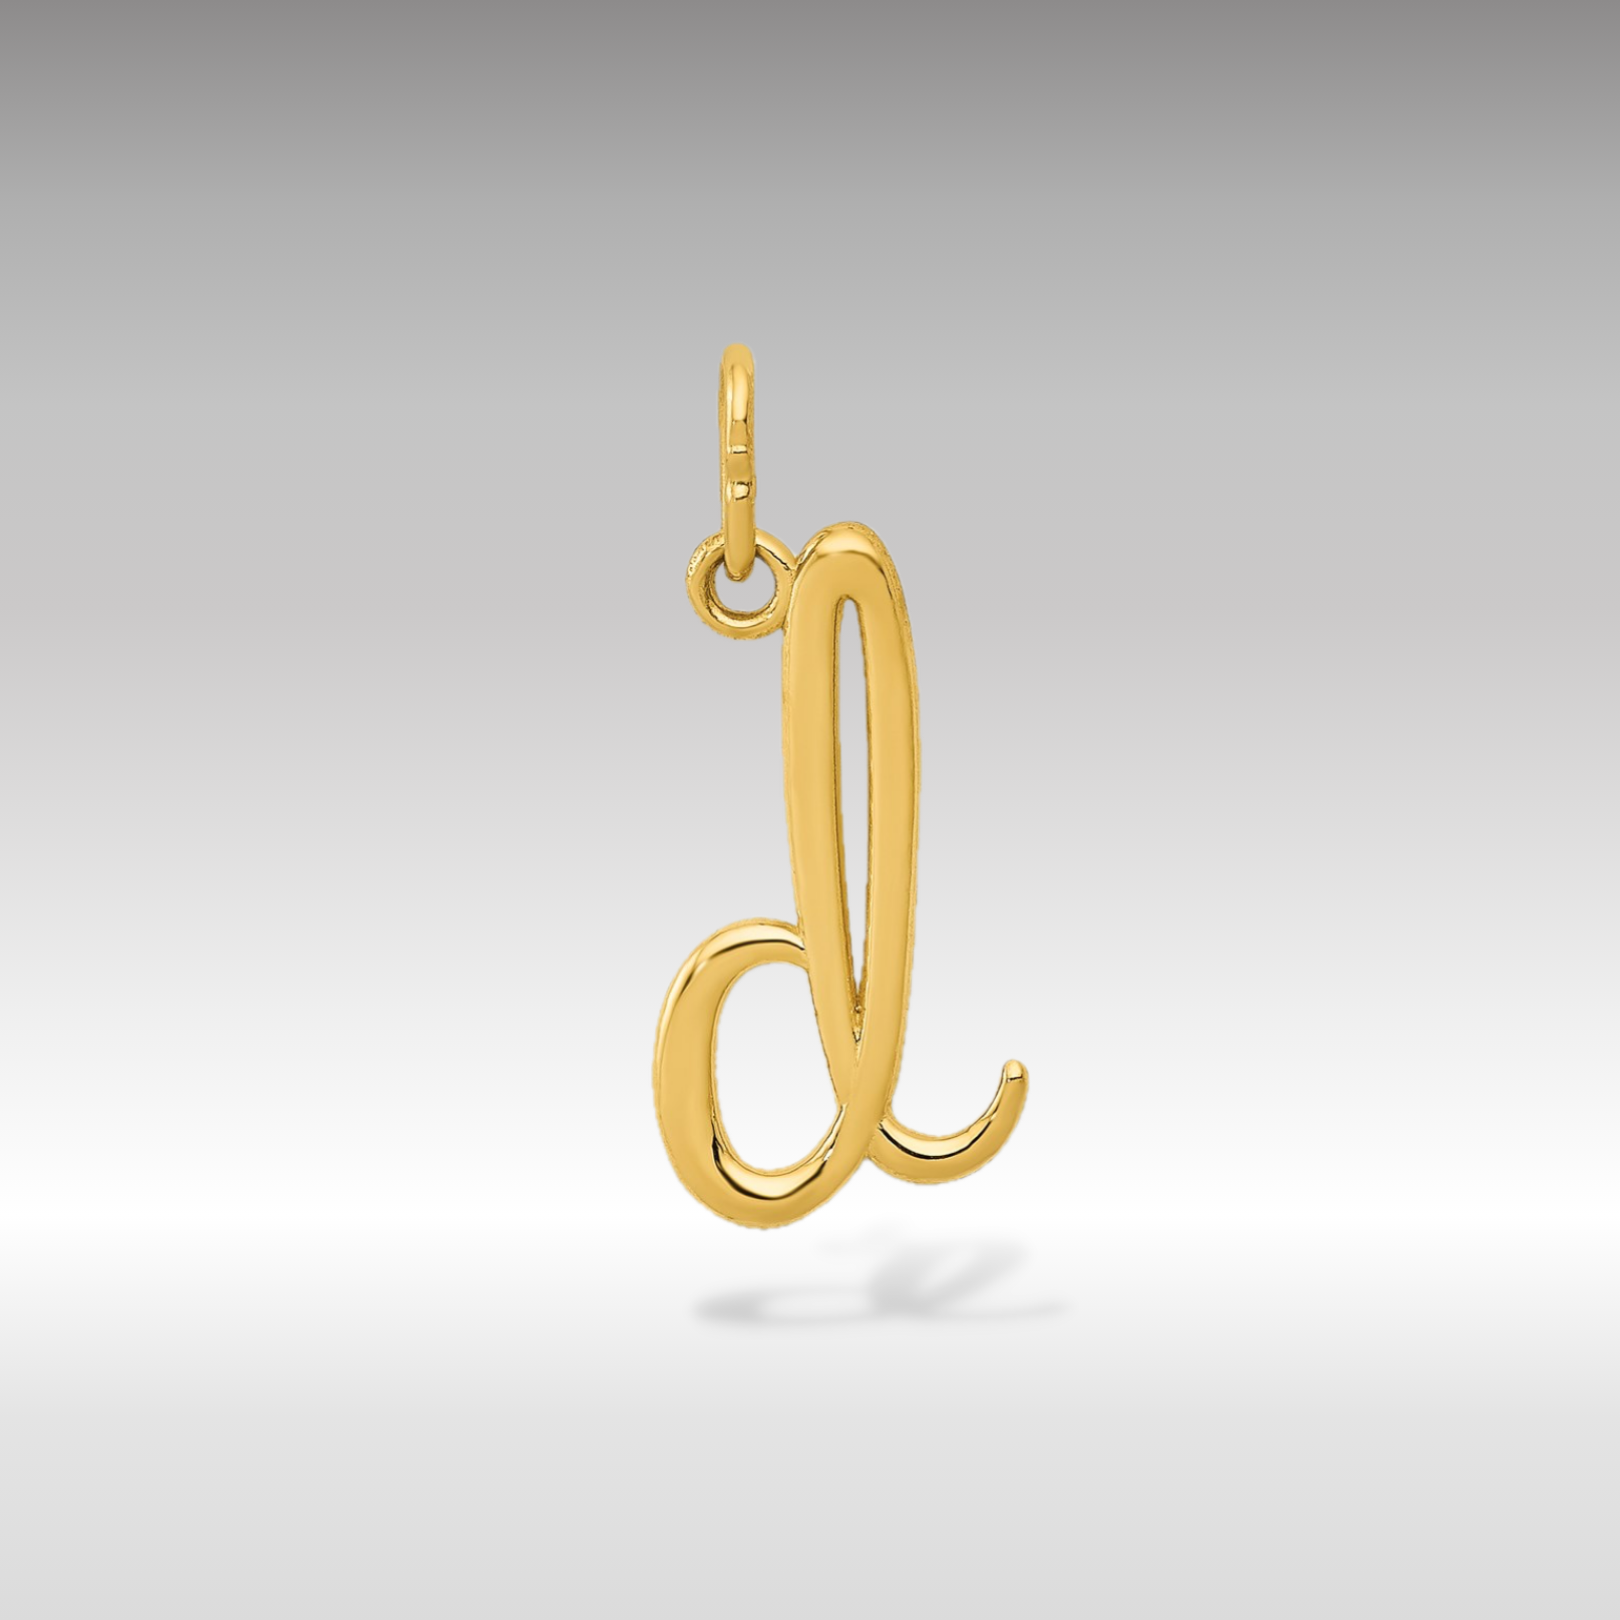 14K Gold Lowercase Initial "d" Pendant - Charlie & Co. Jewelry